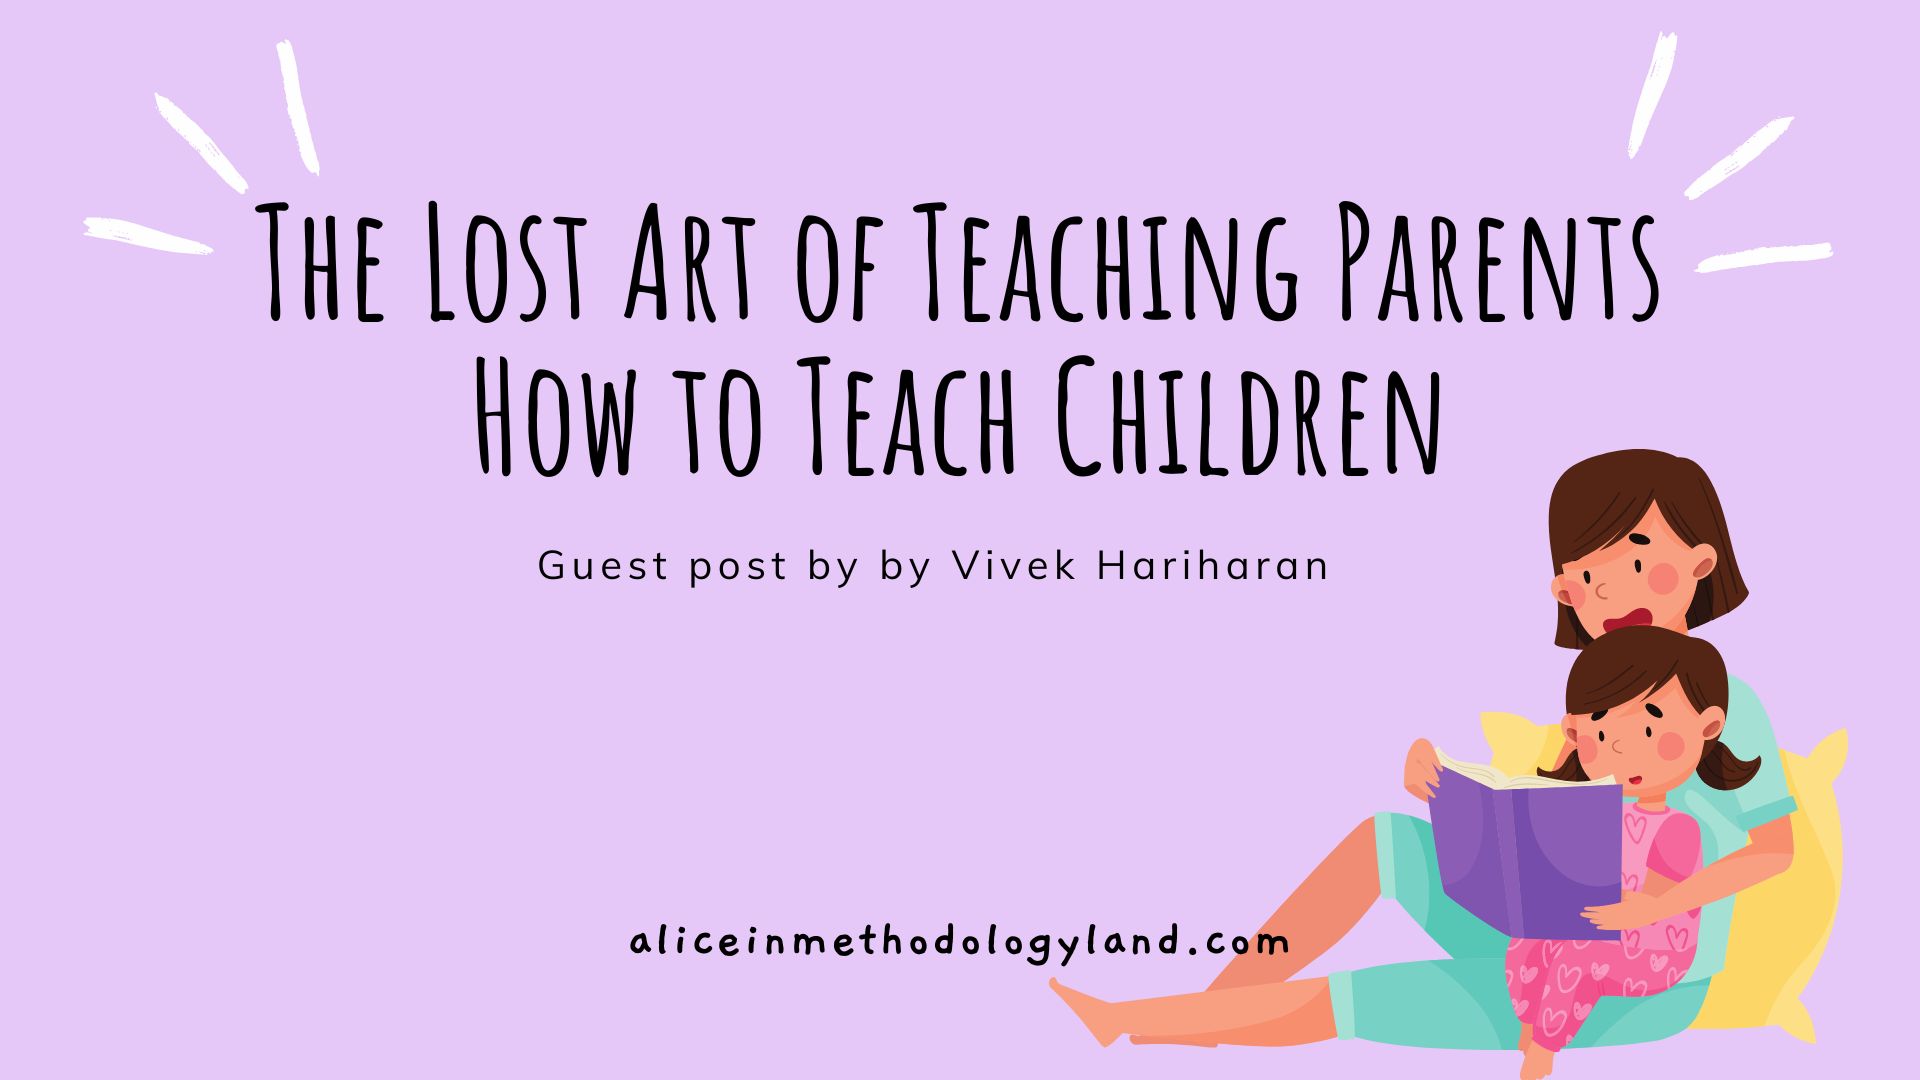 The Lost Art of Teaching Parents How to Teach Children by Vivek Hariharan